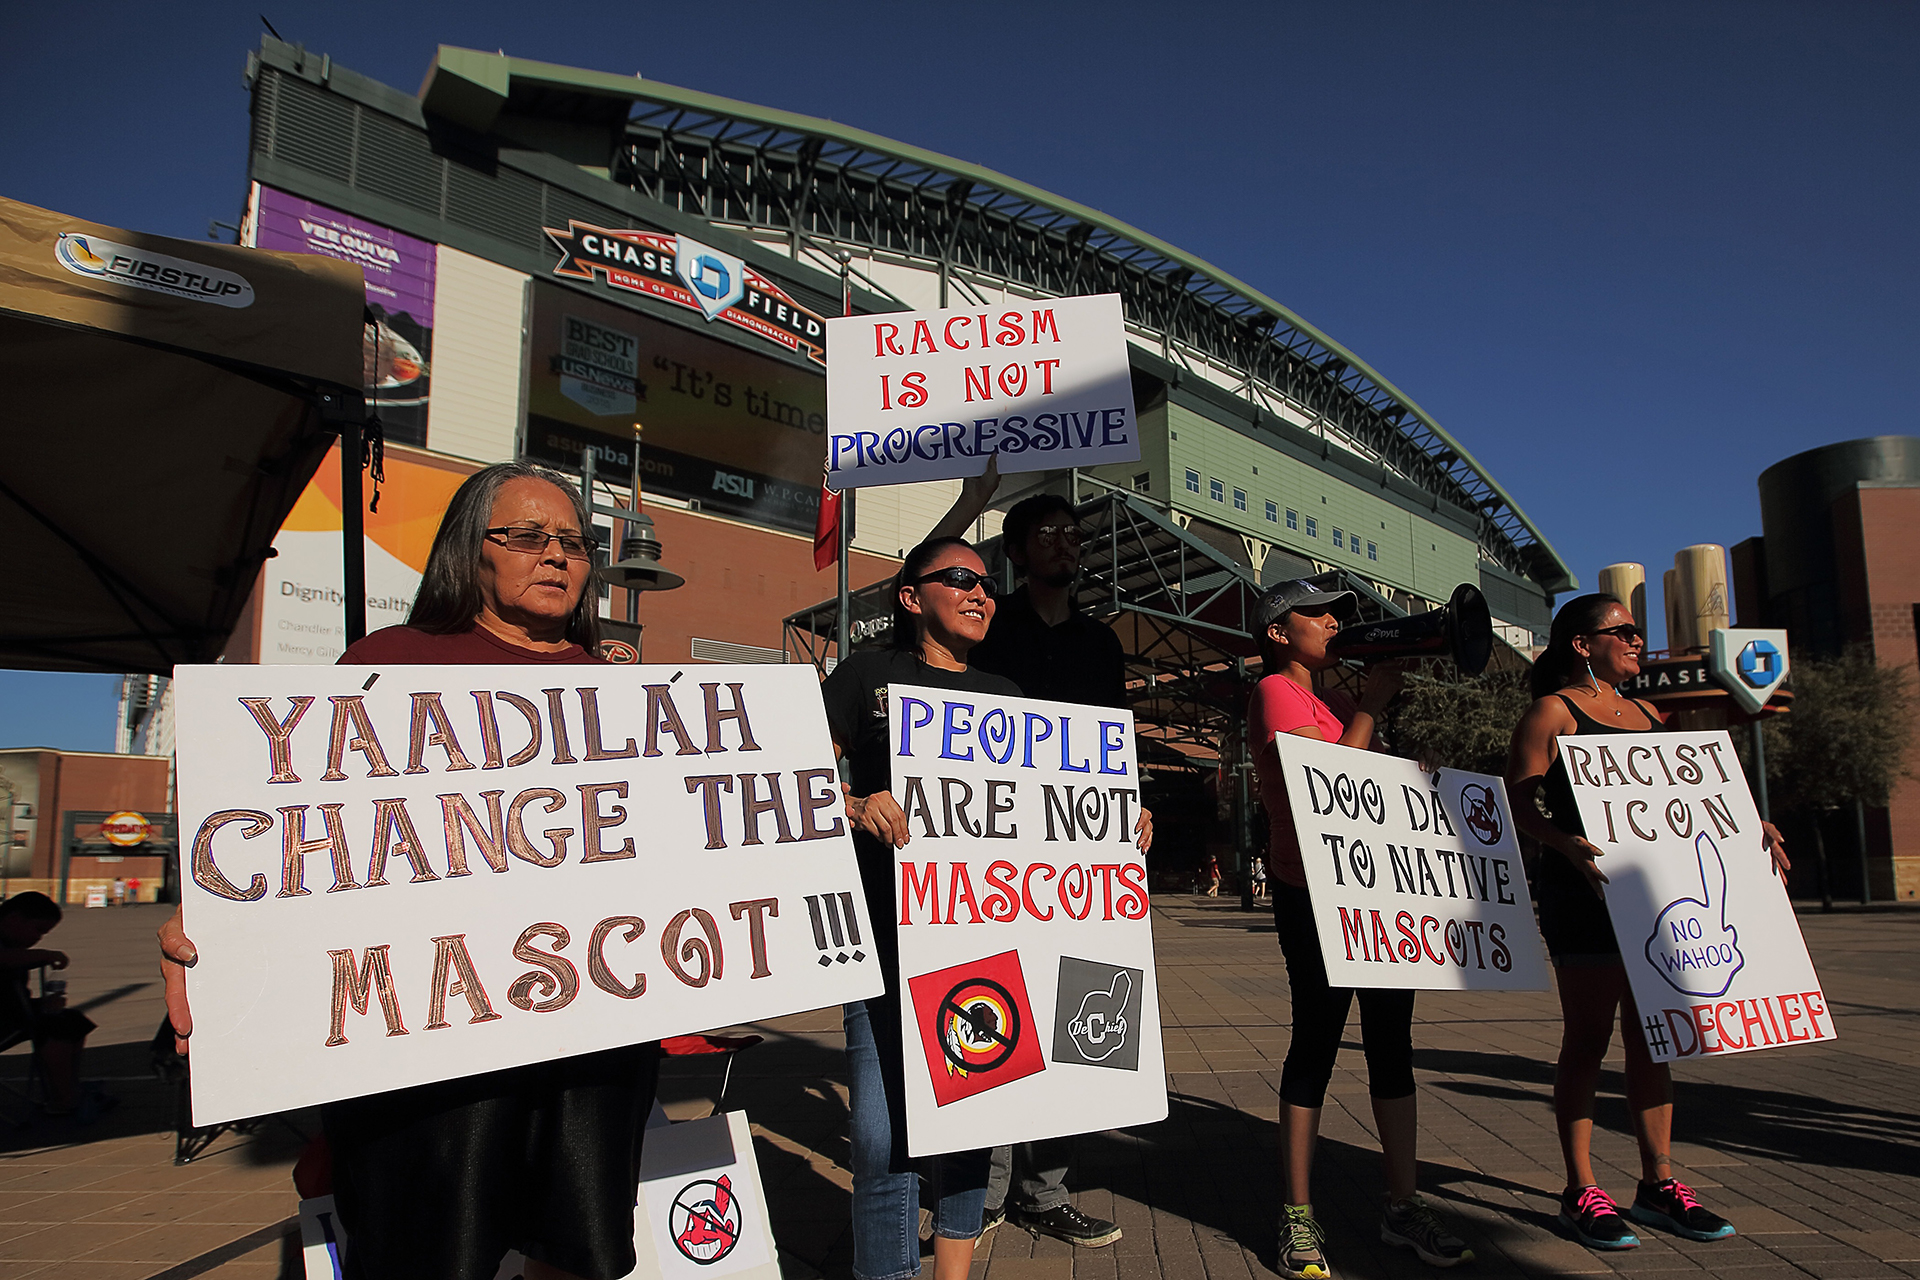 Cleveland Indians Opening Day will include Chief Wahoo protestors